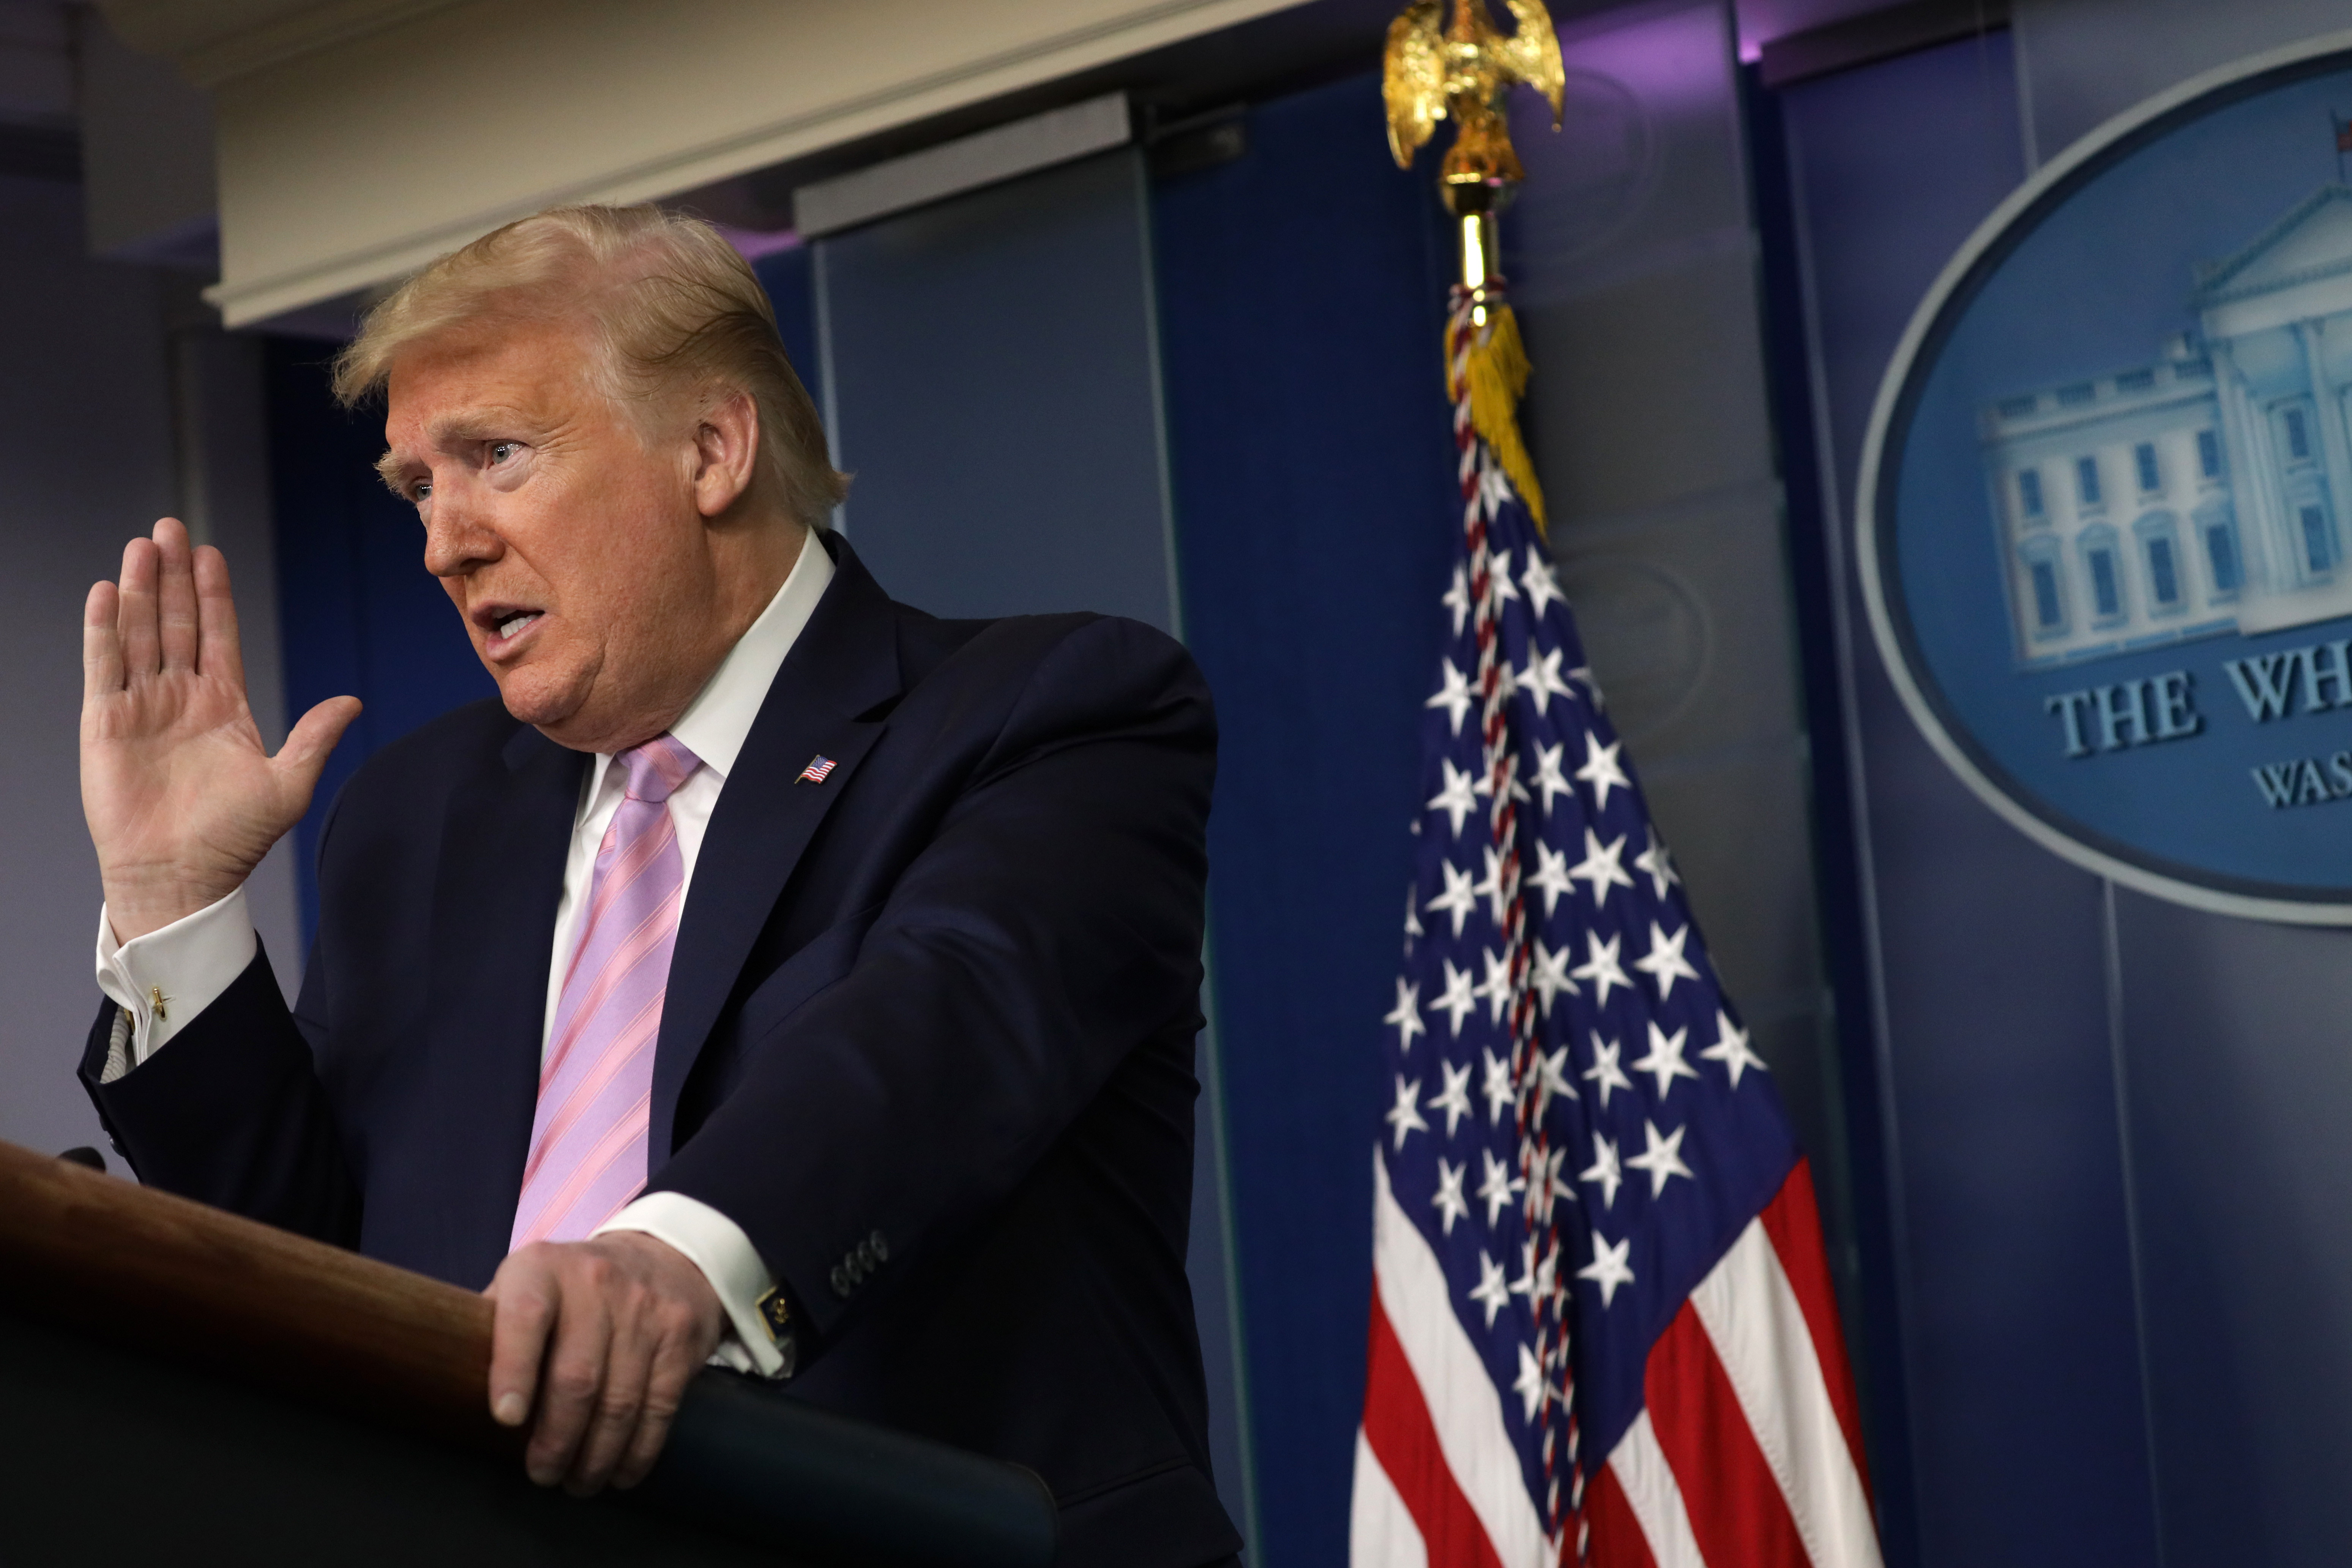 U.S. President Donald Trump speaks during the daily briefing of the White House Coronavirus Task Force in the James Brady Briefing Room April 10, 2020 at the White House in Washington, DC. (Alex Wong/Getty Images)